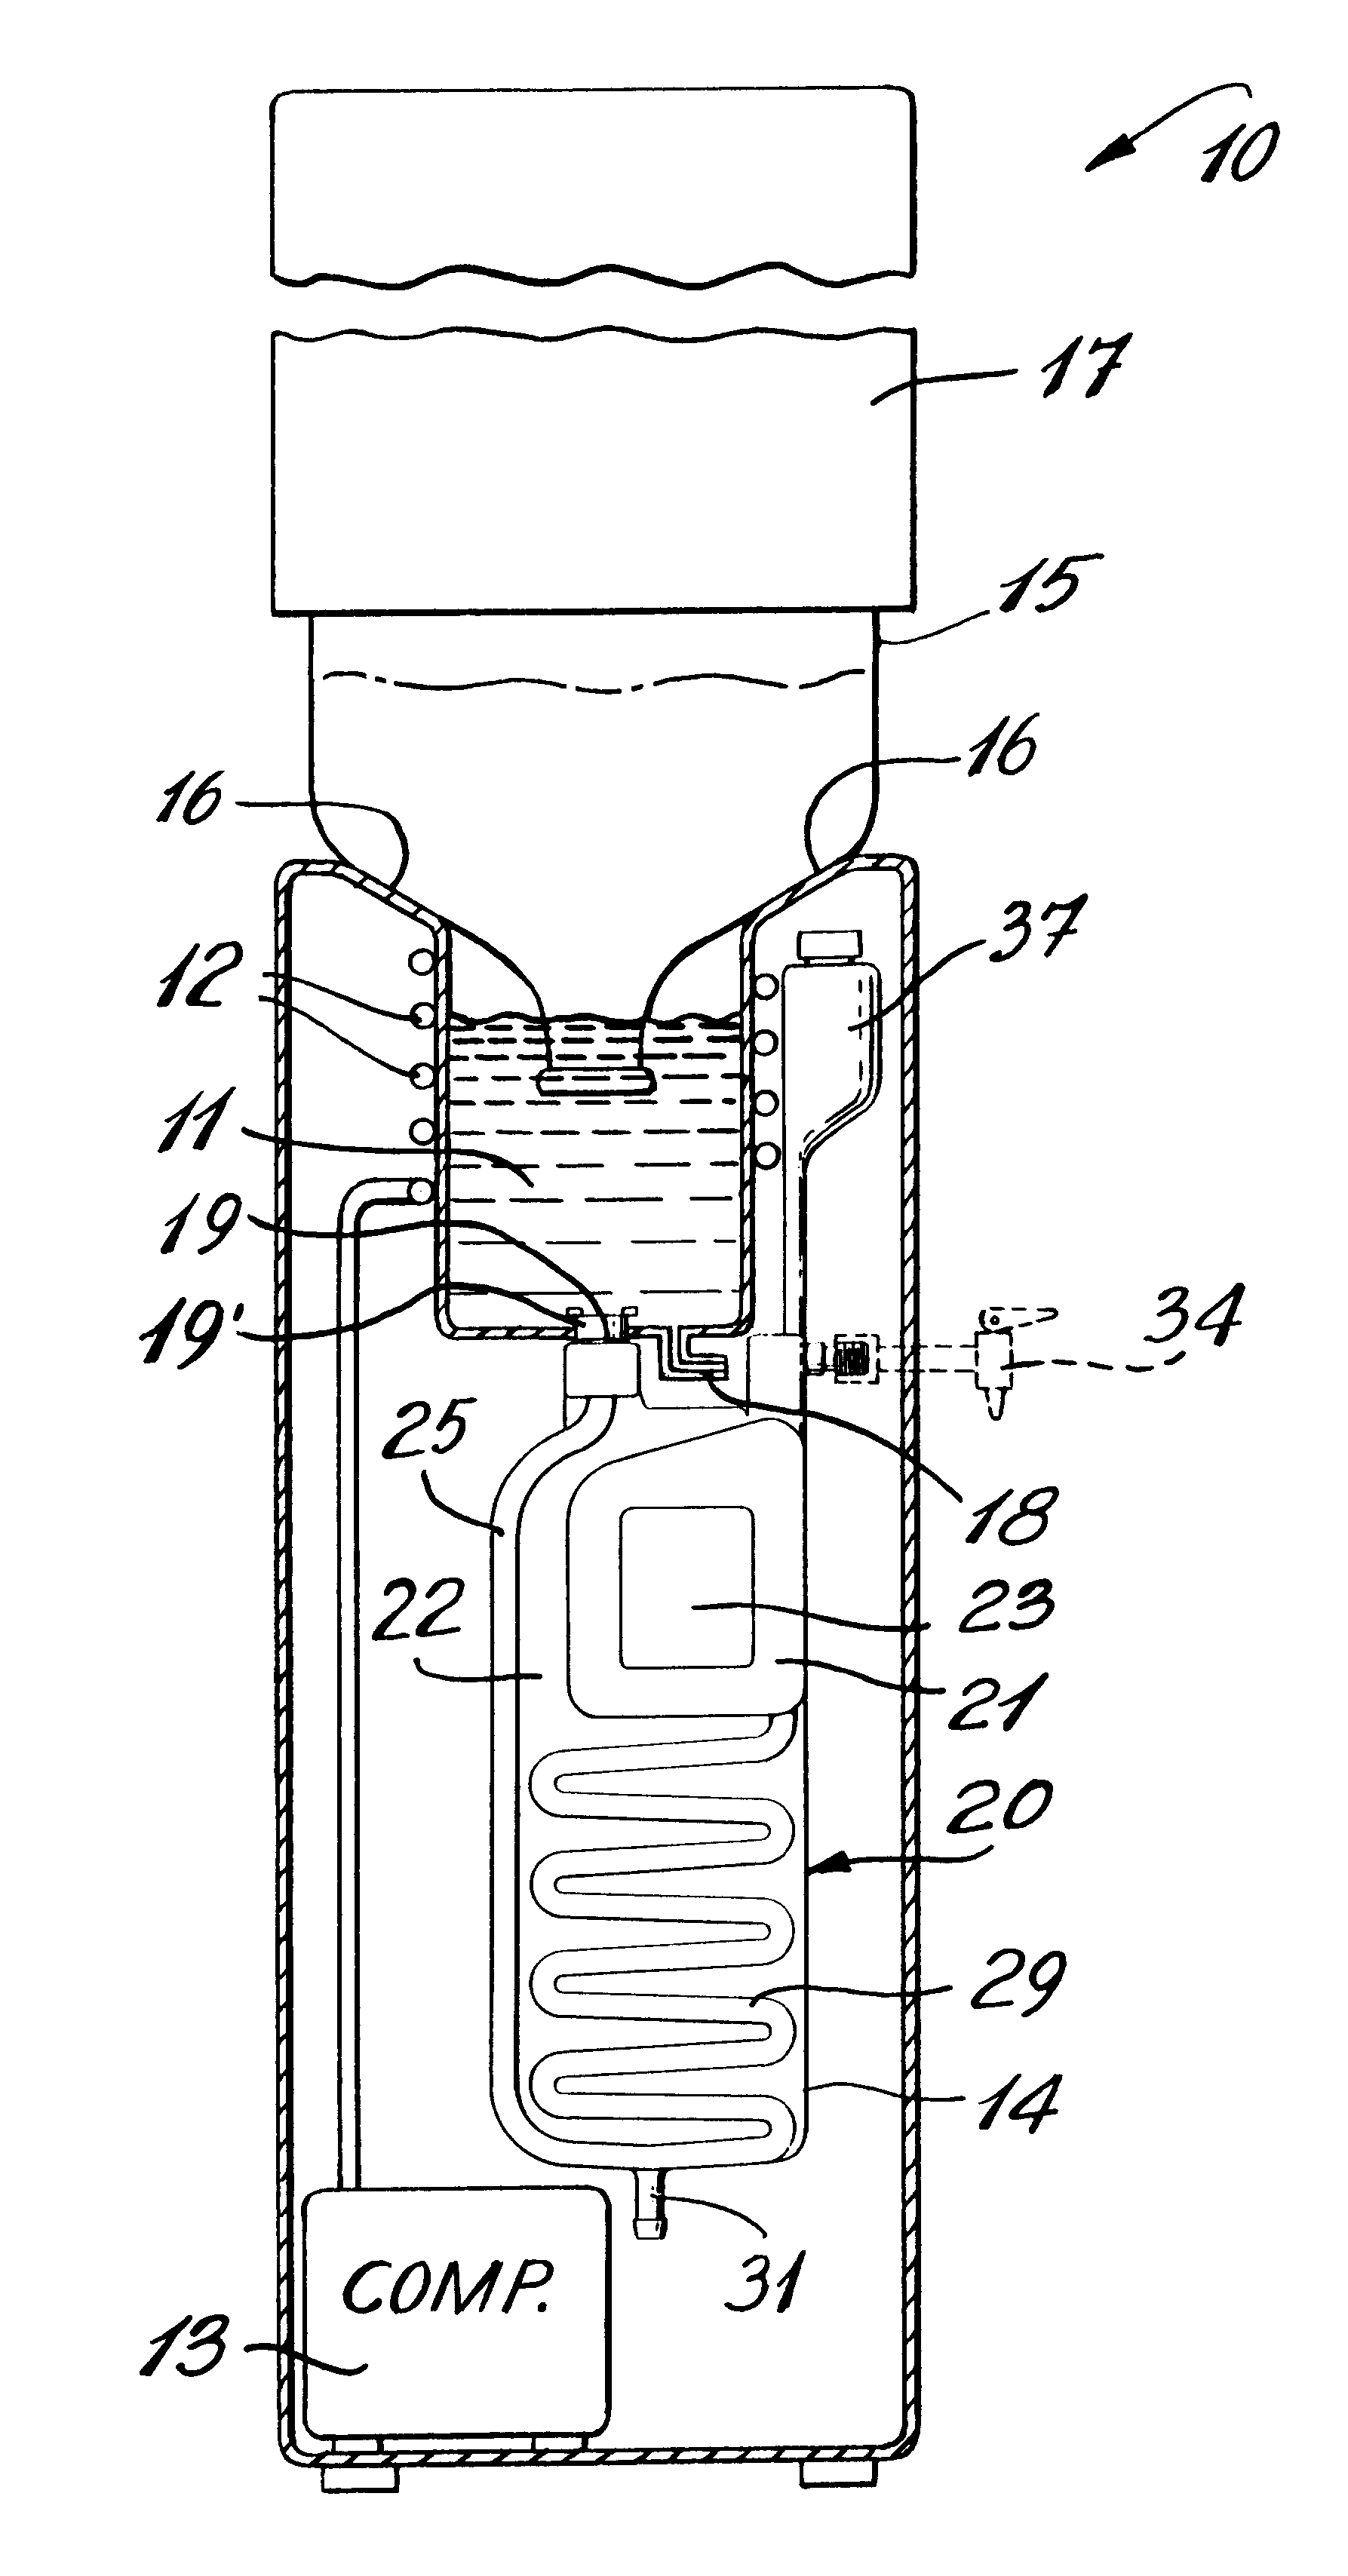 Water heating system for water dispensing fountains